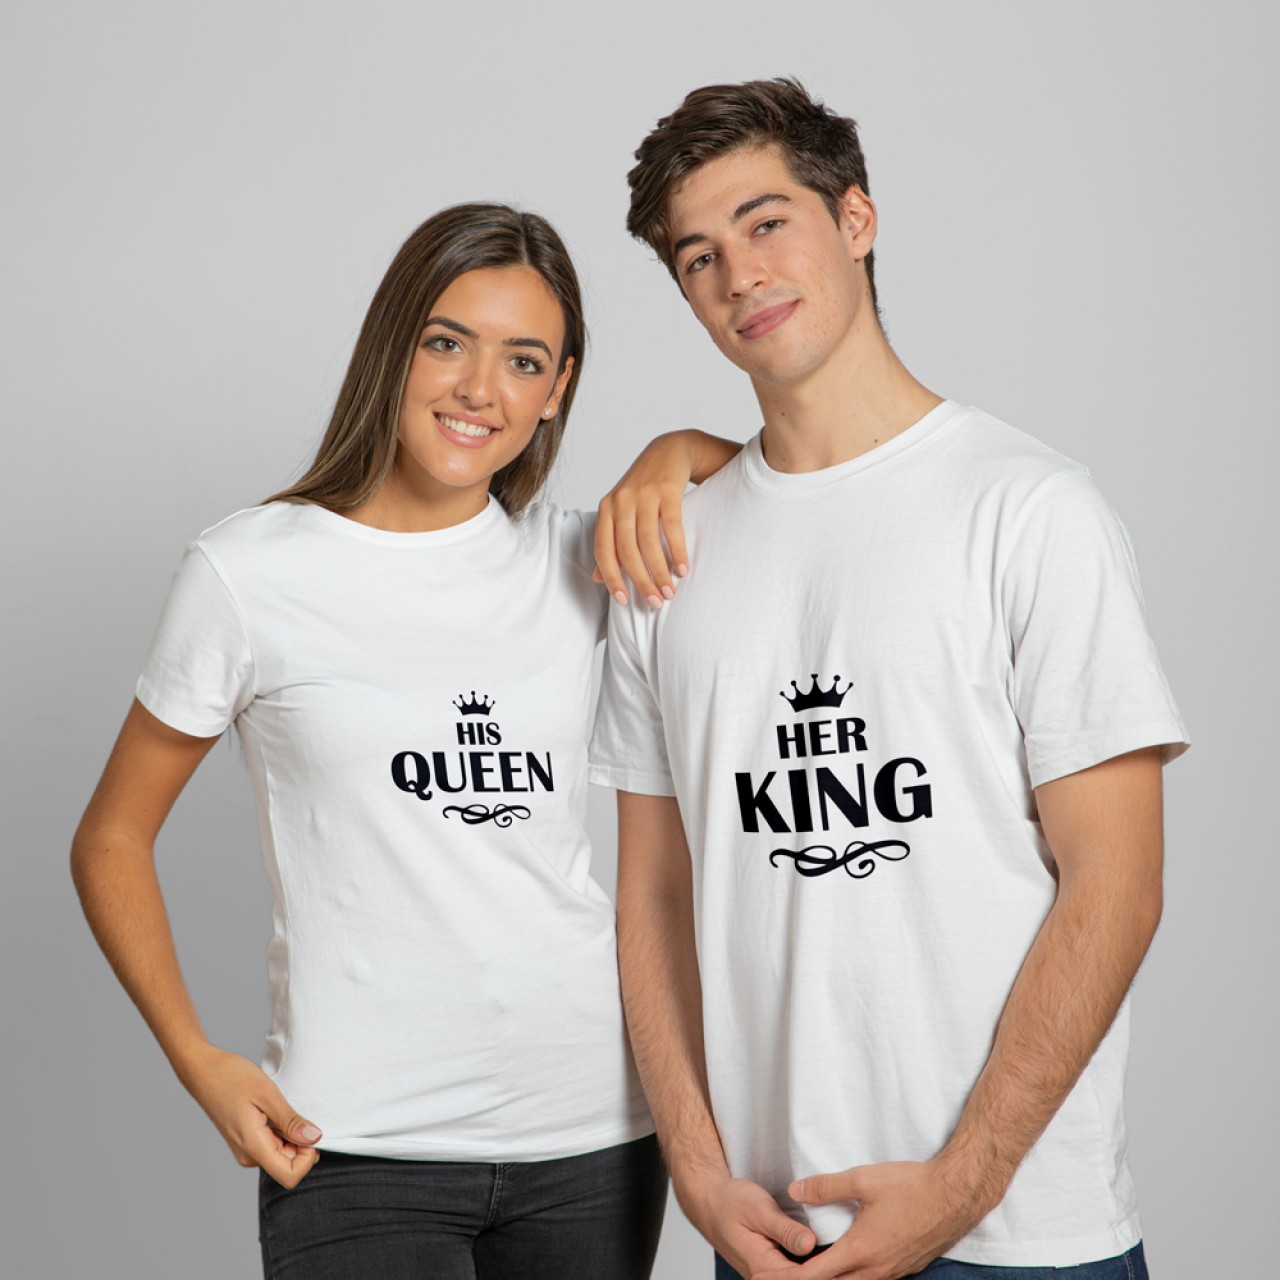 The King & Queen Cotton T-Shirts For Couples